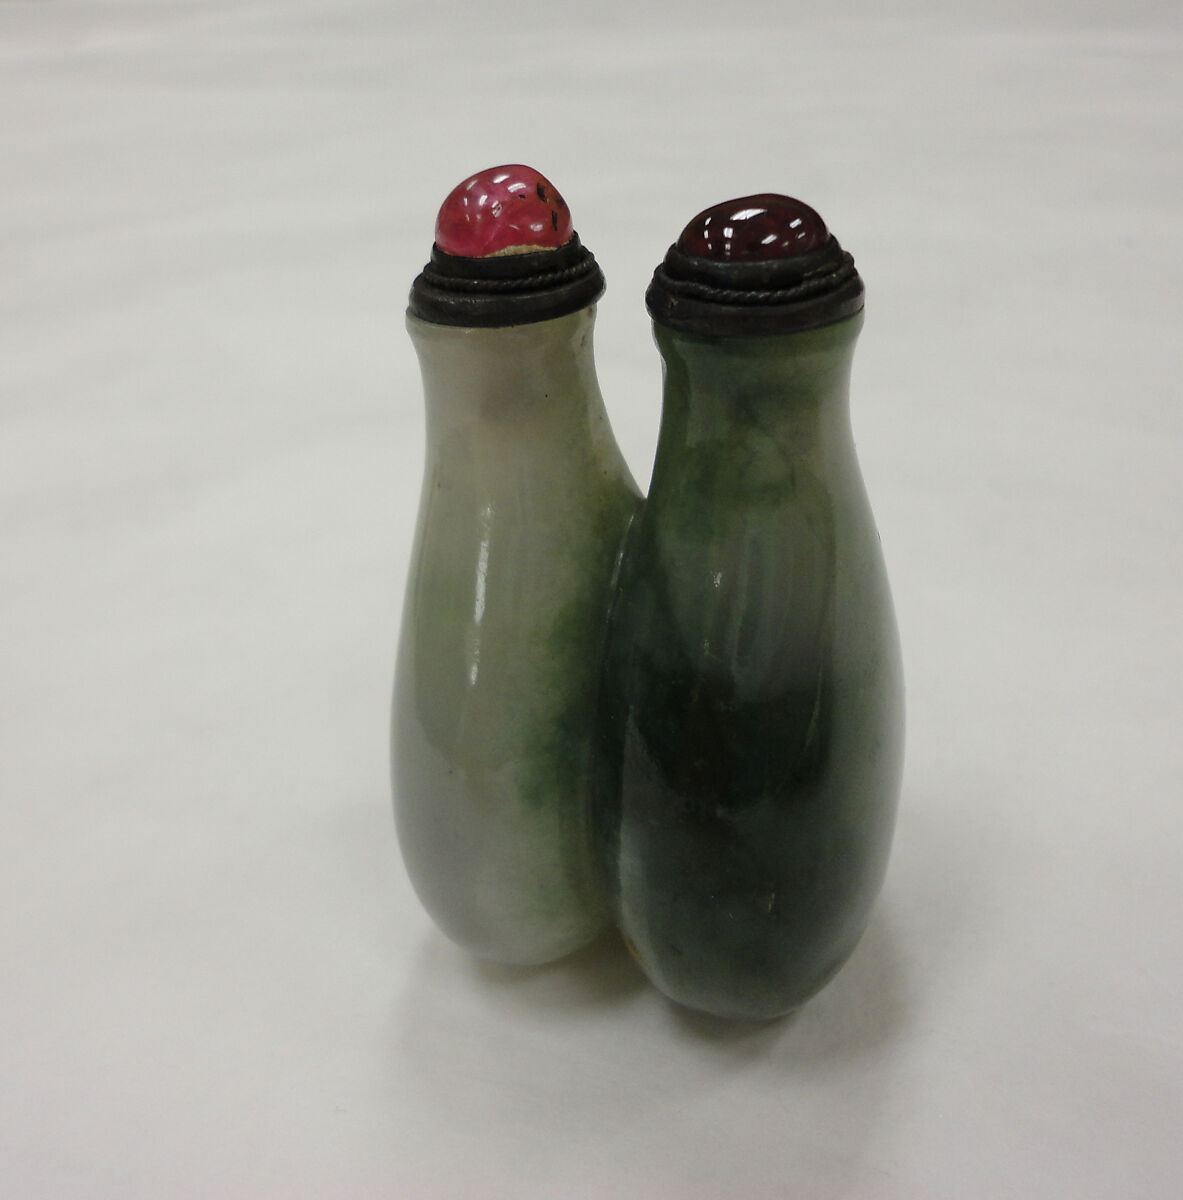 Twin Snuff Bottles, Green jadeite with rose quartz and red garnet stoppers, China 